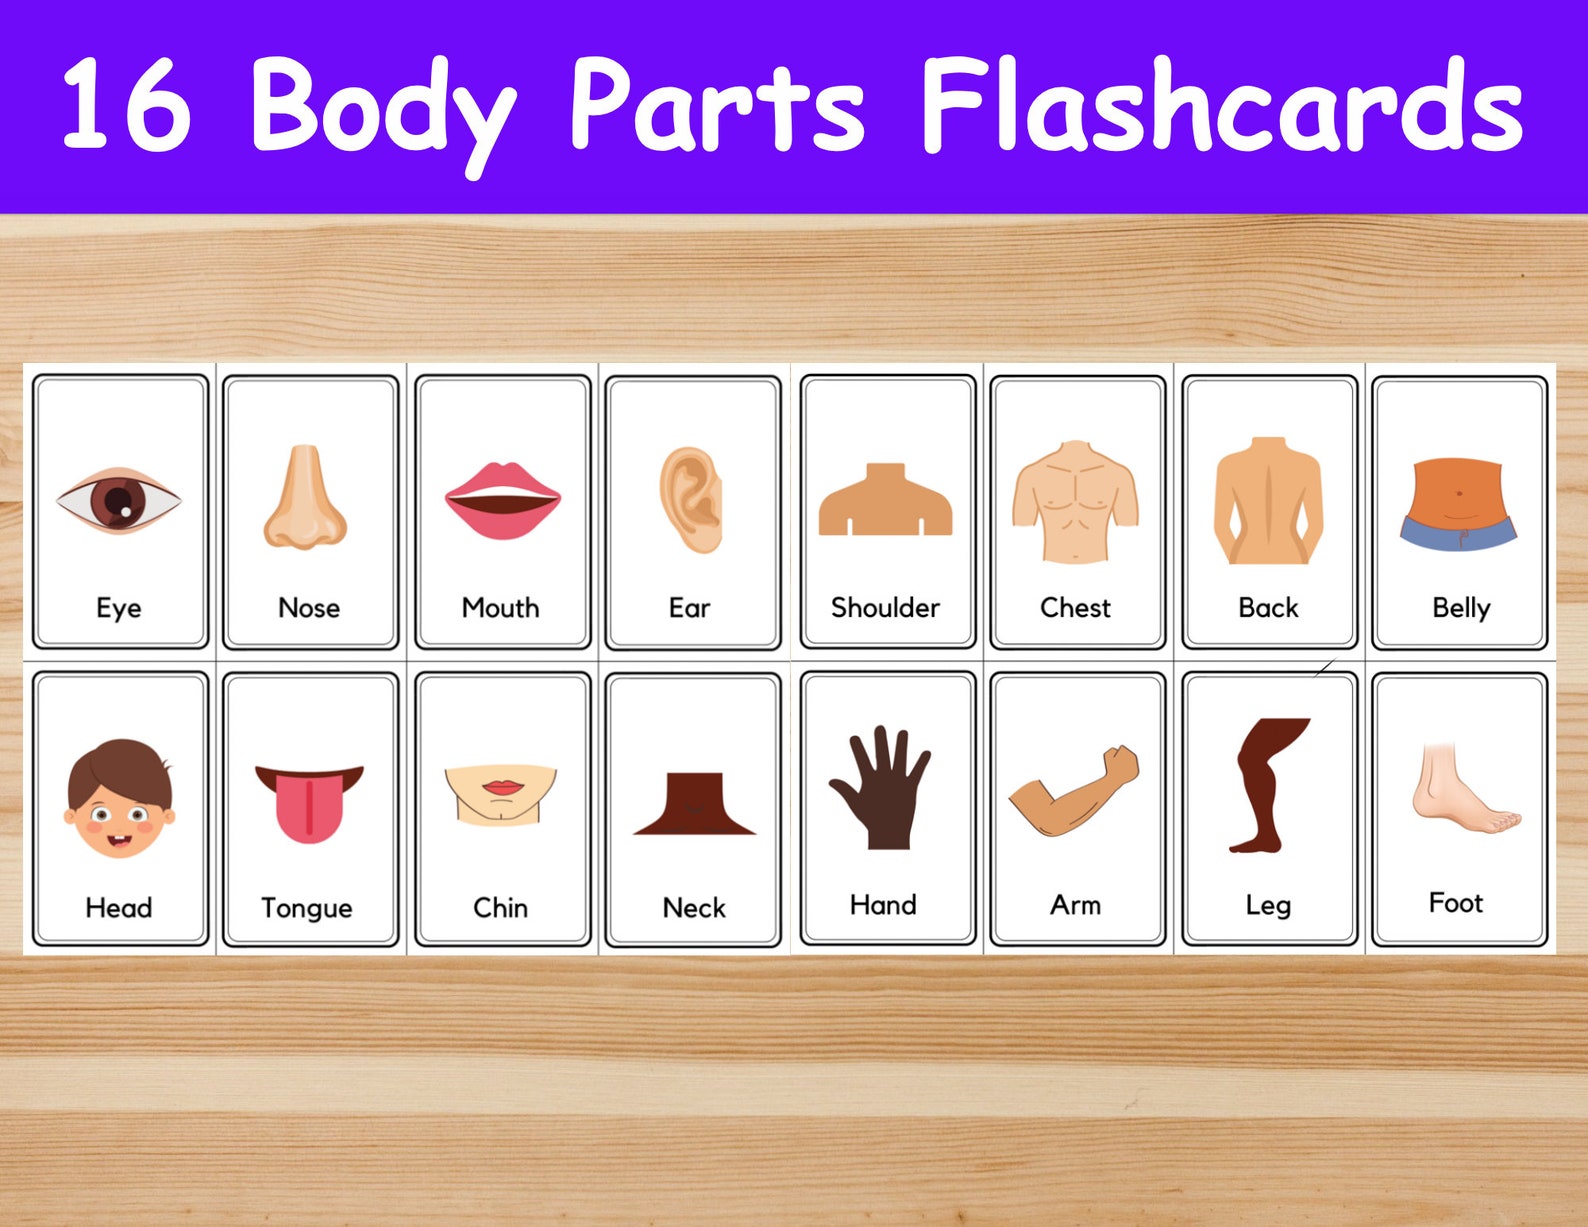 Flash Cards Or Flashcards